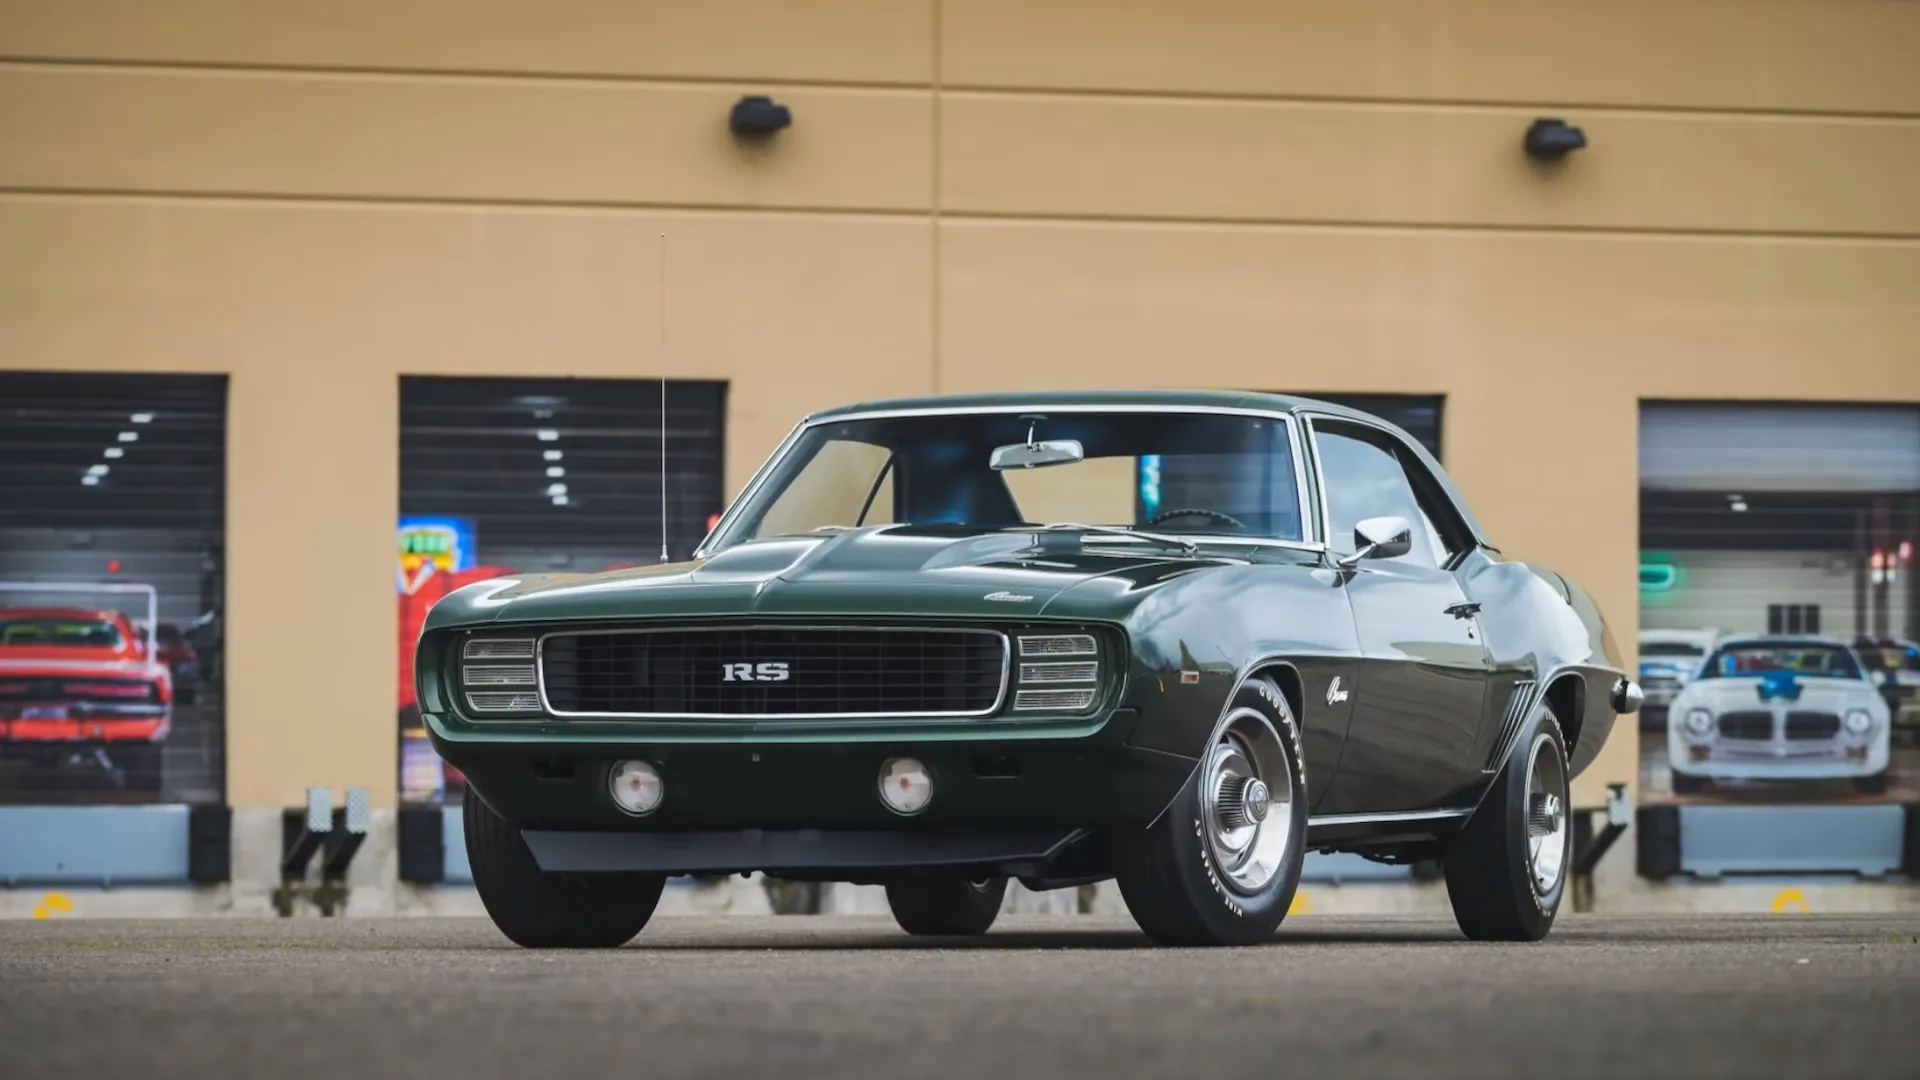 1969 Chevrolet Berger COPO Camaro RS heads to auction